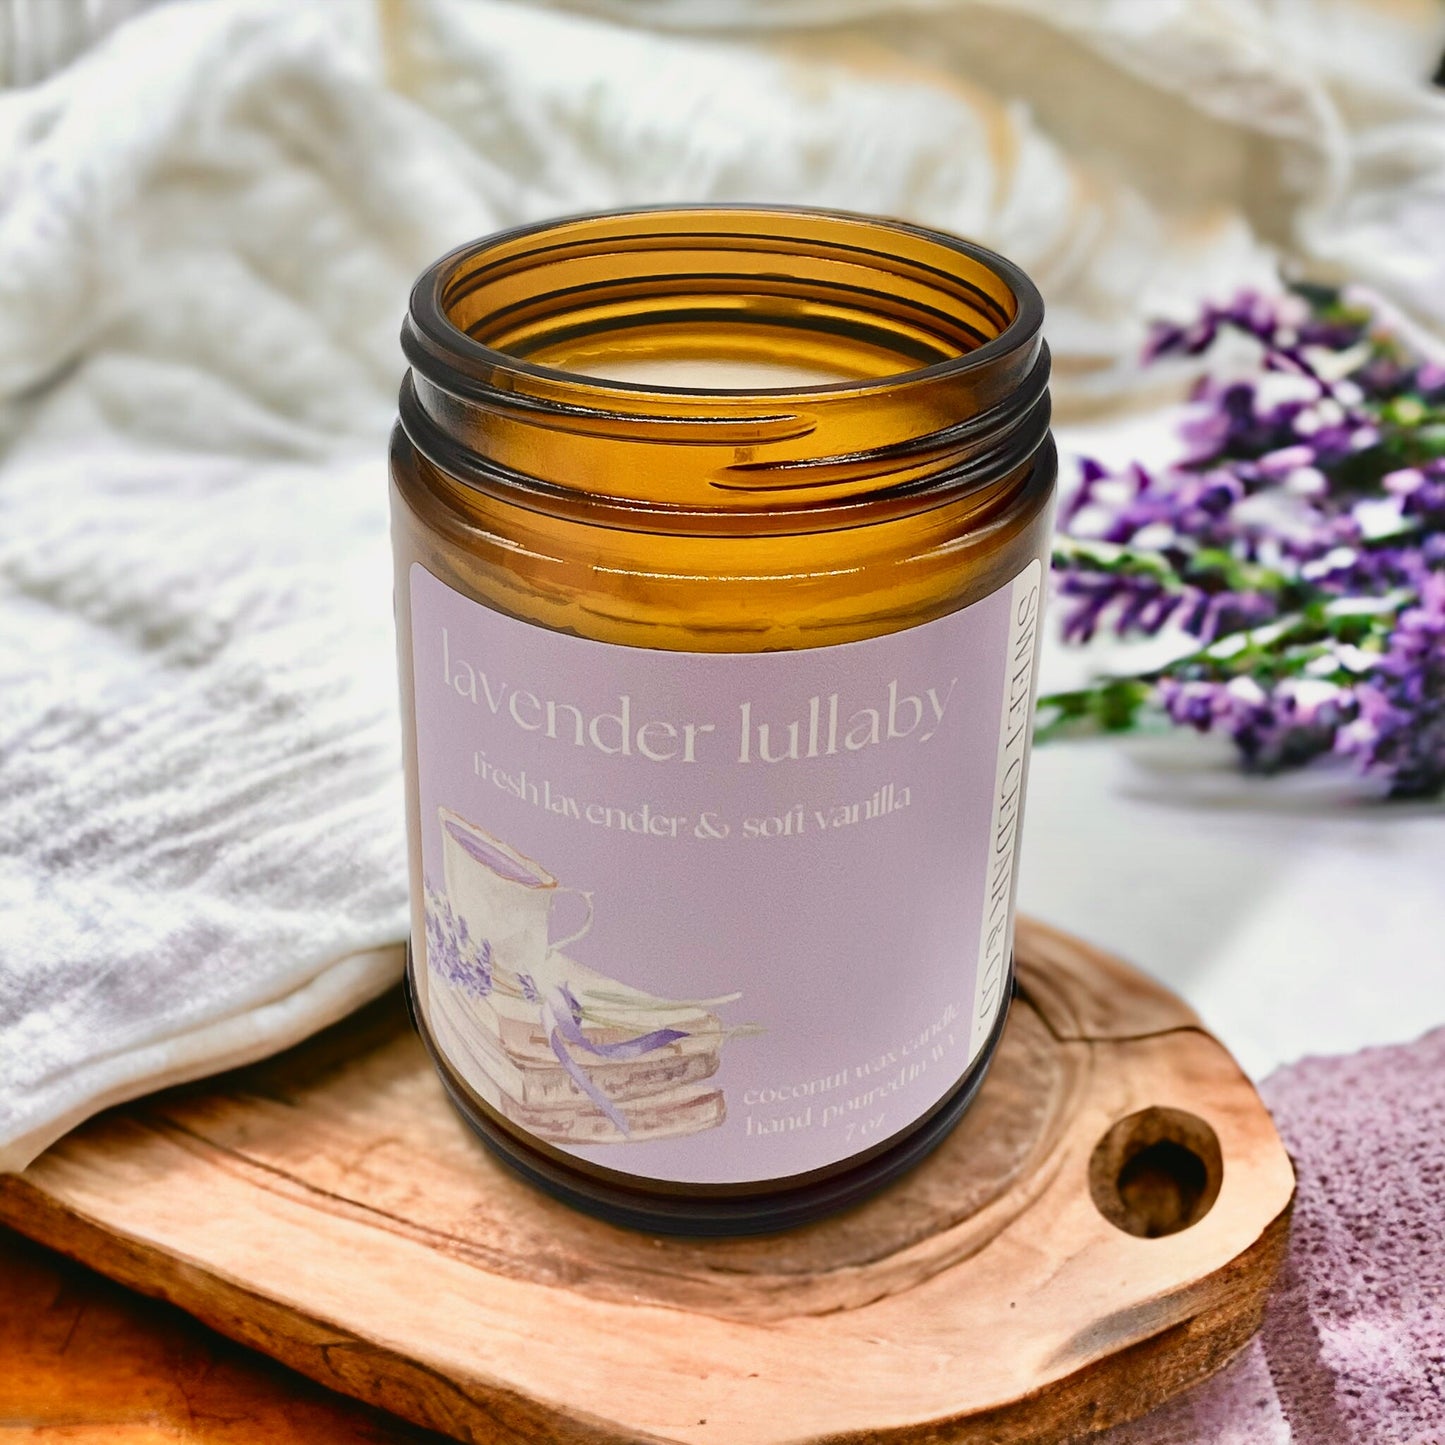 Lavender Lullaby - Coconut Wax Candle - Sweet Cedar & Co.